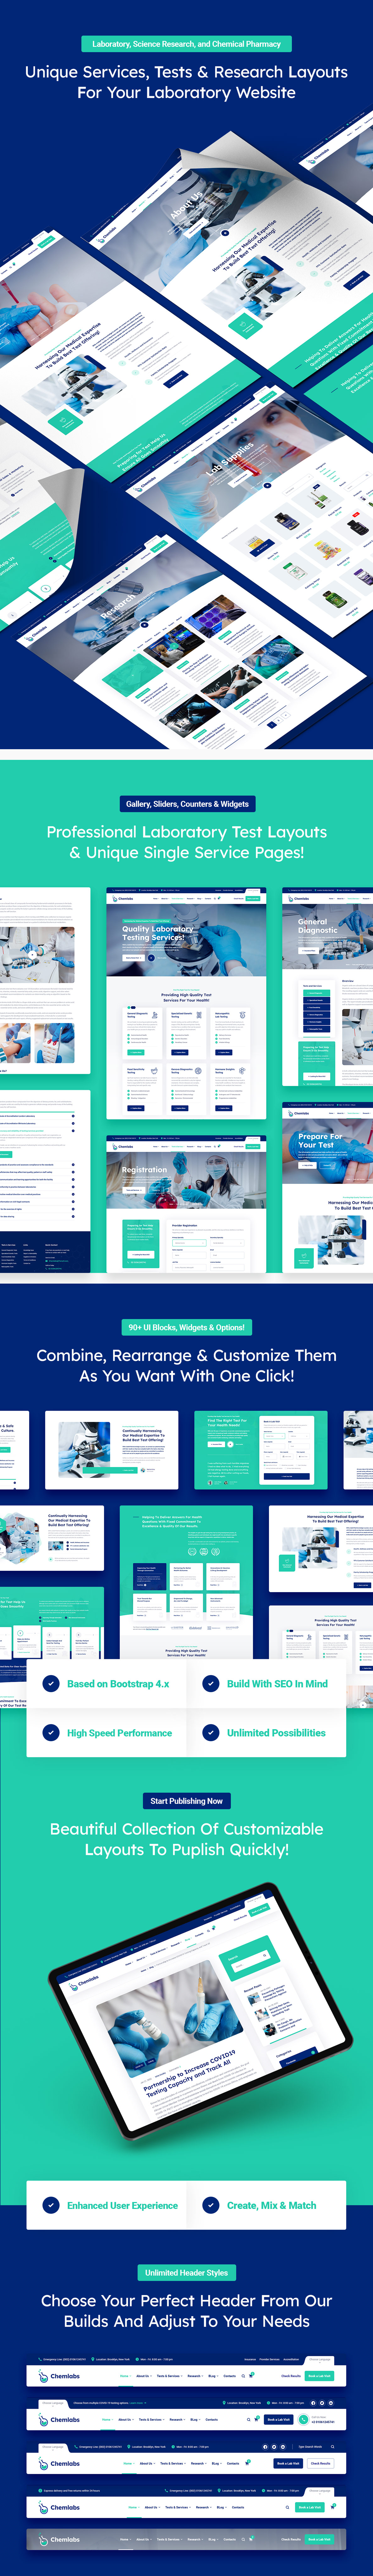 Chemlabs – Laboratory & Science Research HTML5 Template - 6